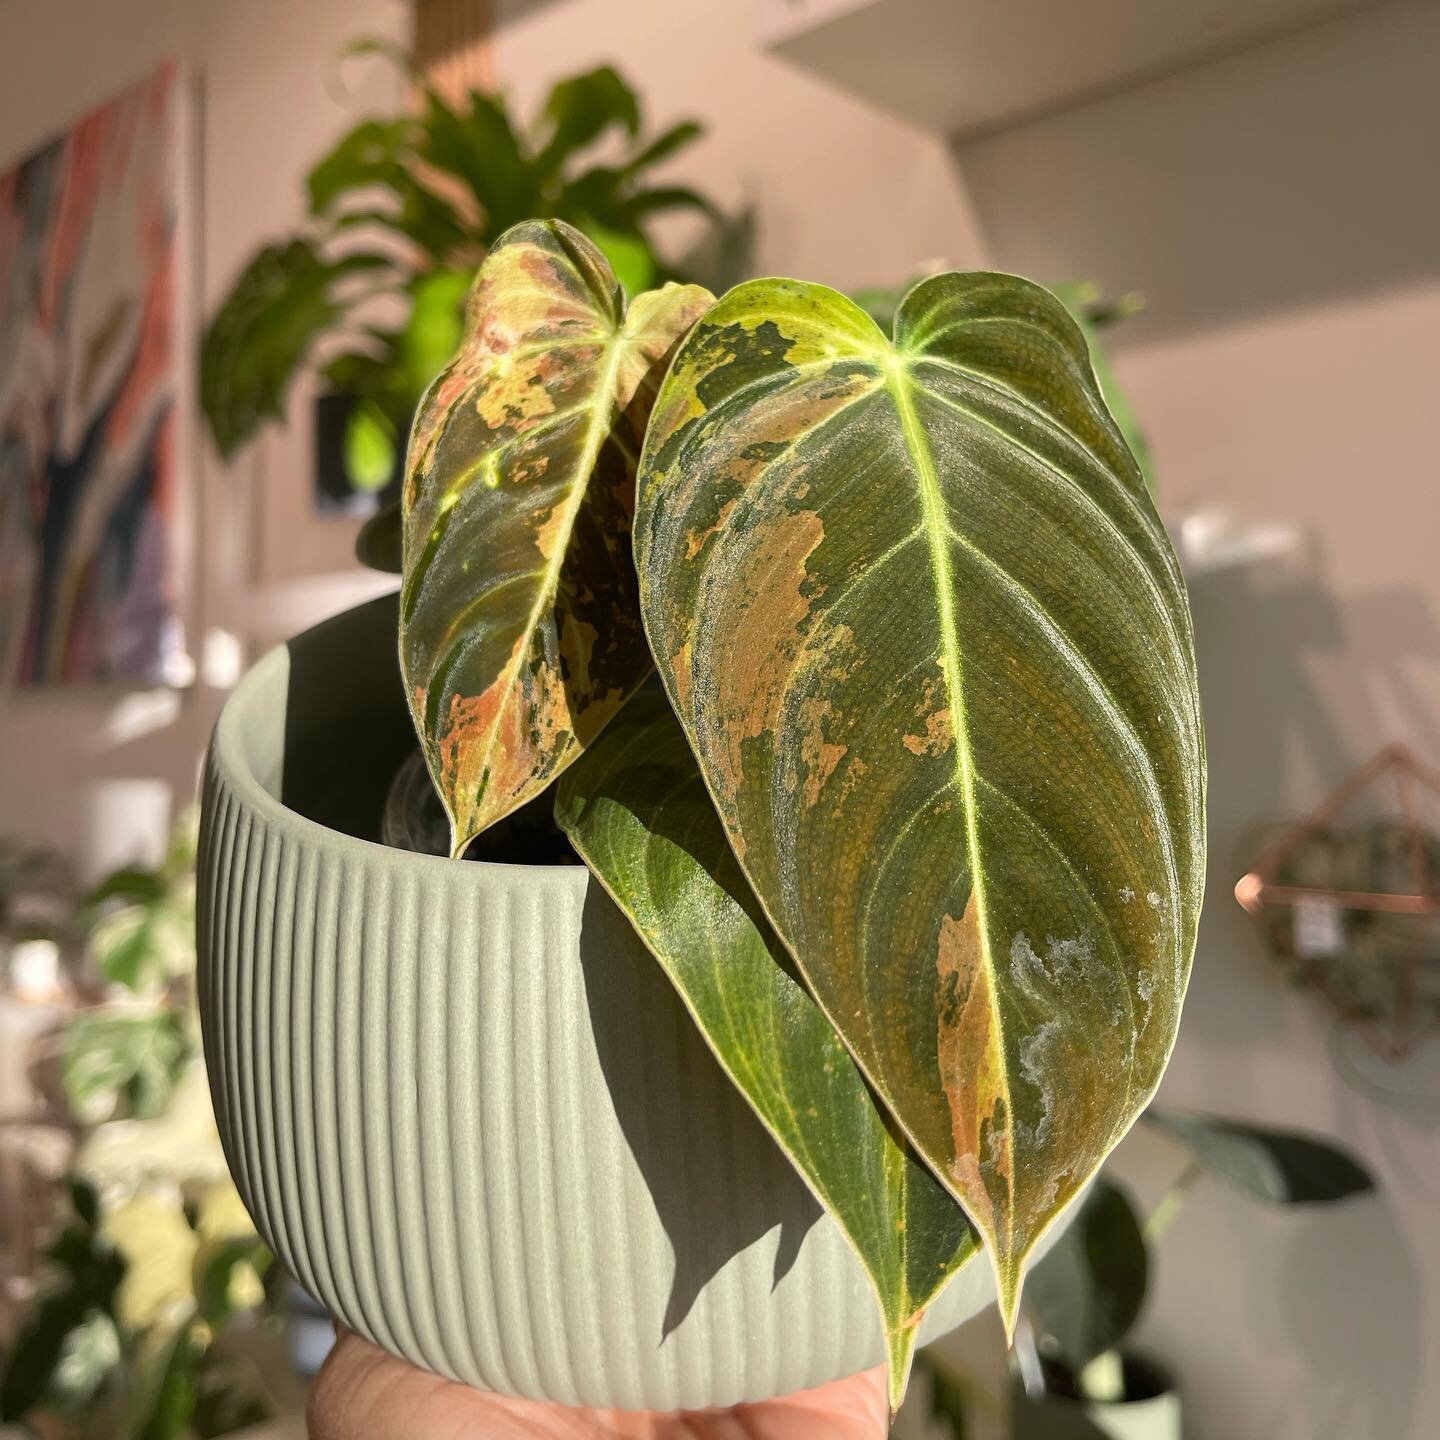 #variegatedphilodendronmelanochrysum surprisingly easy to grow and did not suffer much from transportation. The newest leaf (on the left) is promising, showcasing a range of color from pink, burnt sienna, cream, lime green and green. The most interes